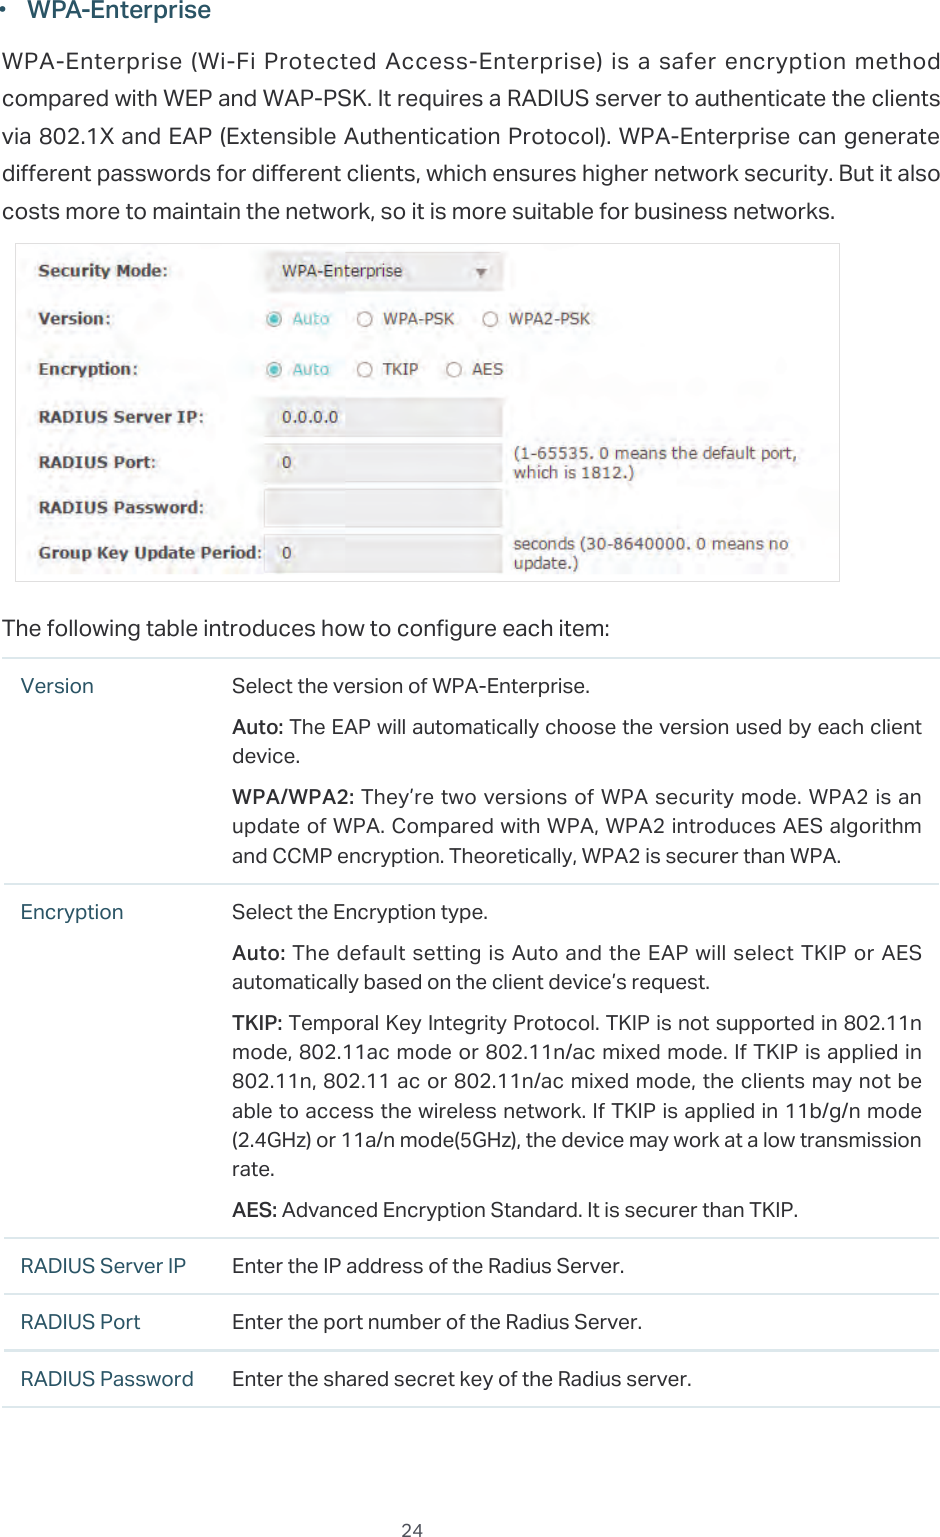  24 ·WPA-EnterpriseWPA-Enterprise (Wi-Fi Protected Access-Enterprise) is a safer encryption method compared with WEP and WAP-PSK. It requires a RADIUS server to authenticate the clients via 802.1X and EAP (Extensible Authentication Protocol). WPA-Enterprise can generate different passwords for different clients, which ensures higher network security. But it also costs more to maintain the network, so it is more suitable for business networks.The following table introduces how to configure each item:Version Select the version of WPA-Enterprise.Auto: The EAP will automatically choose the version used by each client device.WPA/WPA2: They’re two versions of WPA security mode. WPA2 is an update of WPA. Compared with WPA, WPA2 introduces AES algorithm and CCMP encryption. Theoretically, WPA2 is securer than WPA.Encryption Select the Encryption type.Auto: The default setting is Auto and the EAP will select TKIP or AES automatically based on the client device’s request.TKIP: Temporal Key Integrity Protocol. TKIP is not supported in 802.11n mode, 802.11ac mode or 802.11n/ac mixed mode. If TKIP is applied in 802.11n, 802.11 ac or 802.11n/ac mixed mode, the clients may not be able to access the wireless network. If TKIP is applied in 11b/g/n mode (2.4GHz) or 11a/n mode(5GHz), the device may work at a low transmission rate.AES: Advanced Encryption Standard. It is securer than TKIP.RADIUS Server IP Enter the IP address of the Radius Server.RADIUS Port Enter the port number of the Radius Server.RADIUS Password Enter the shared secret key of the Radius server.